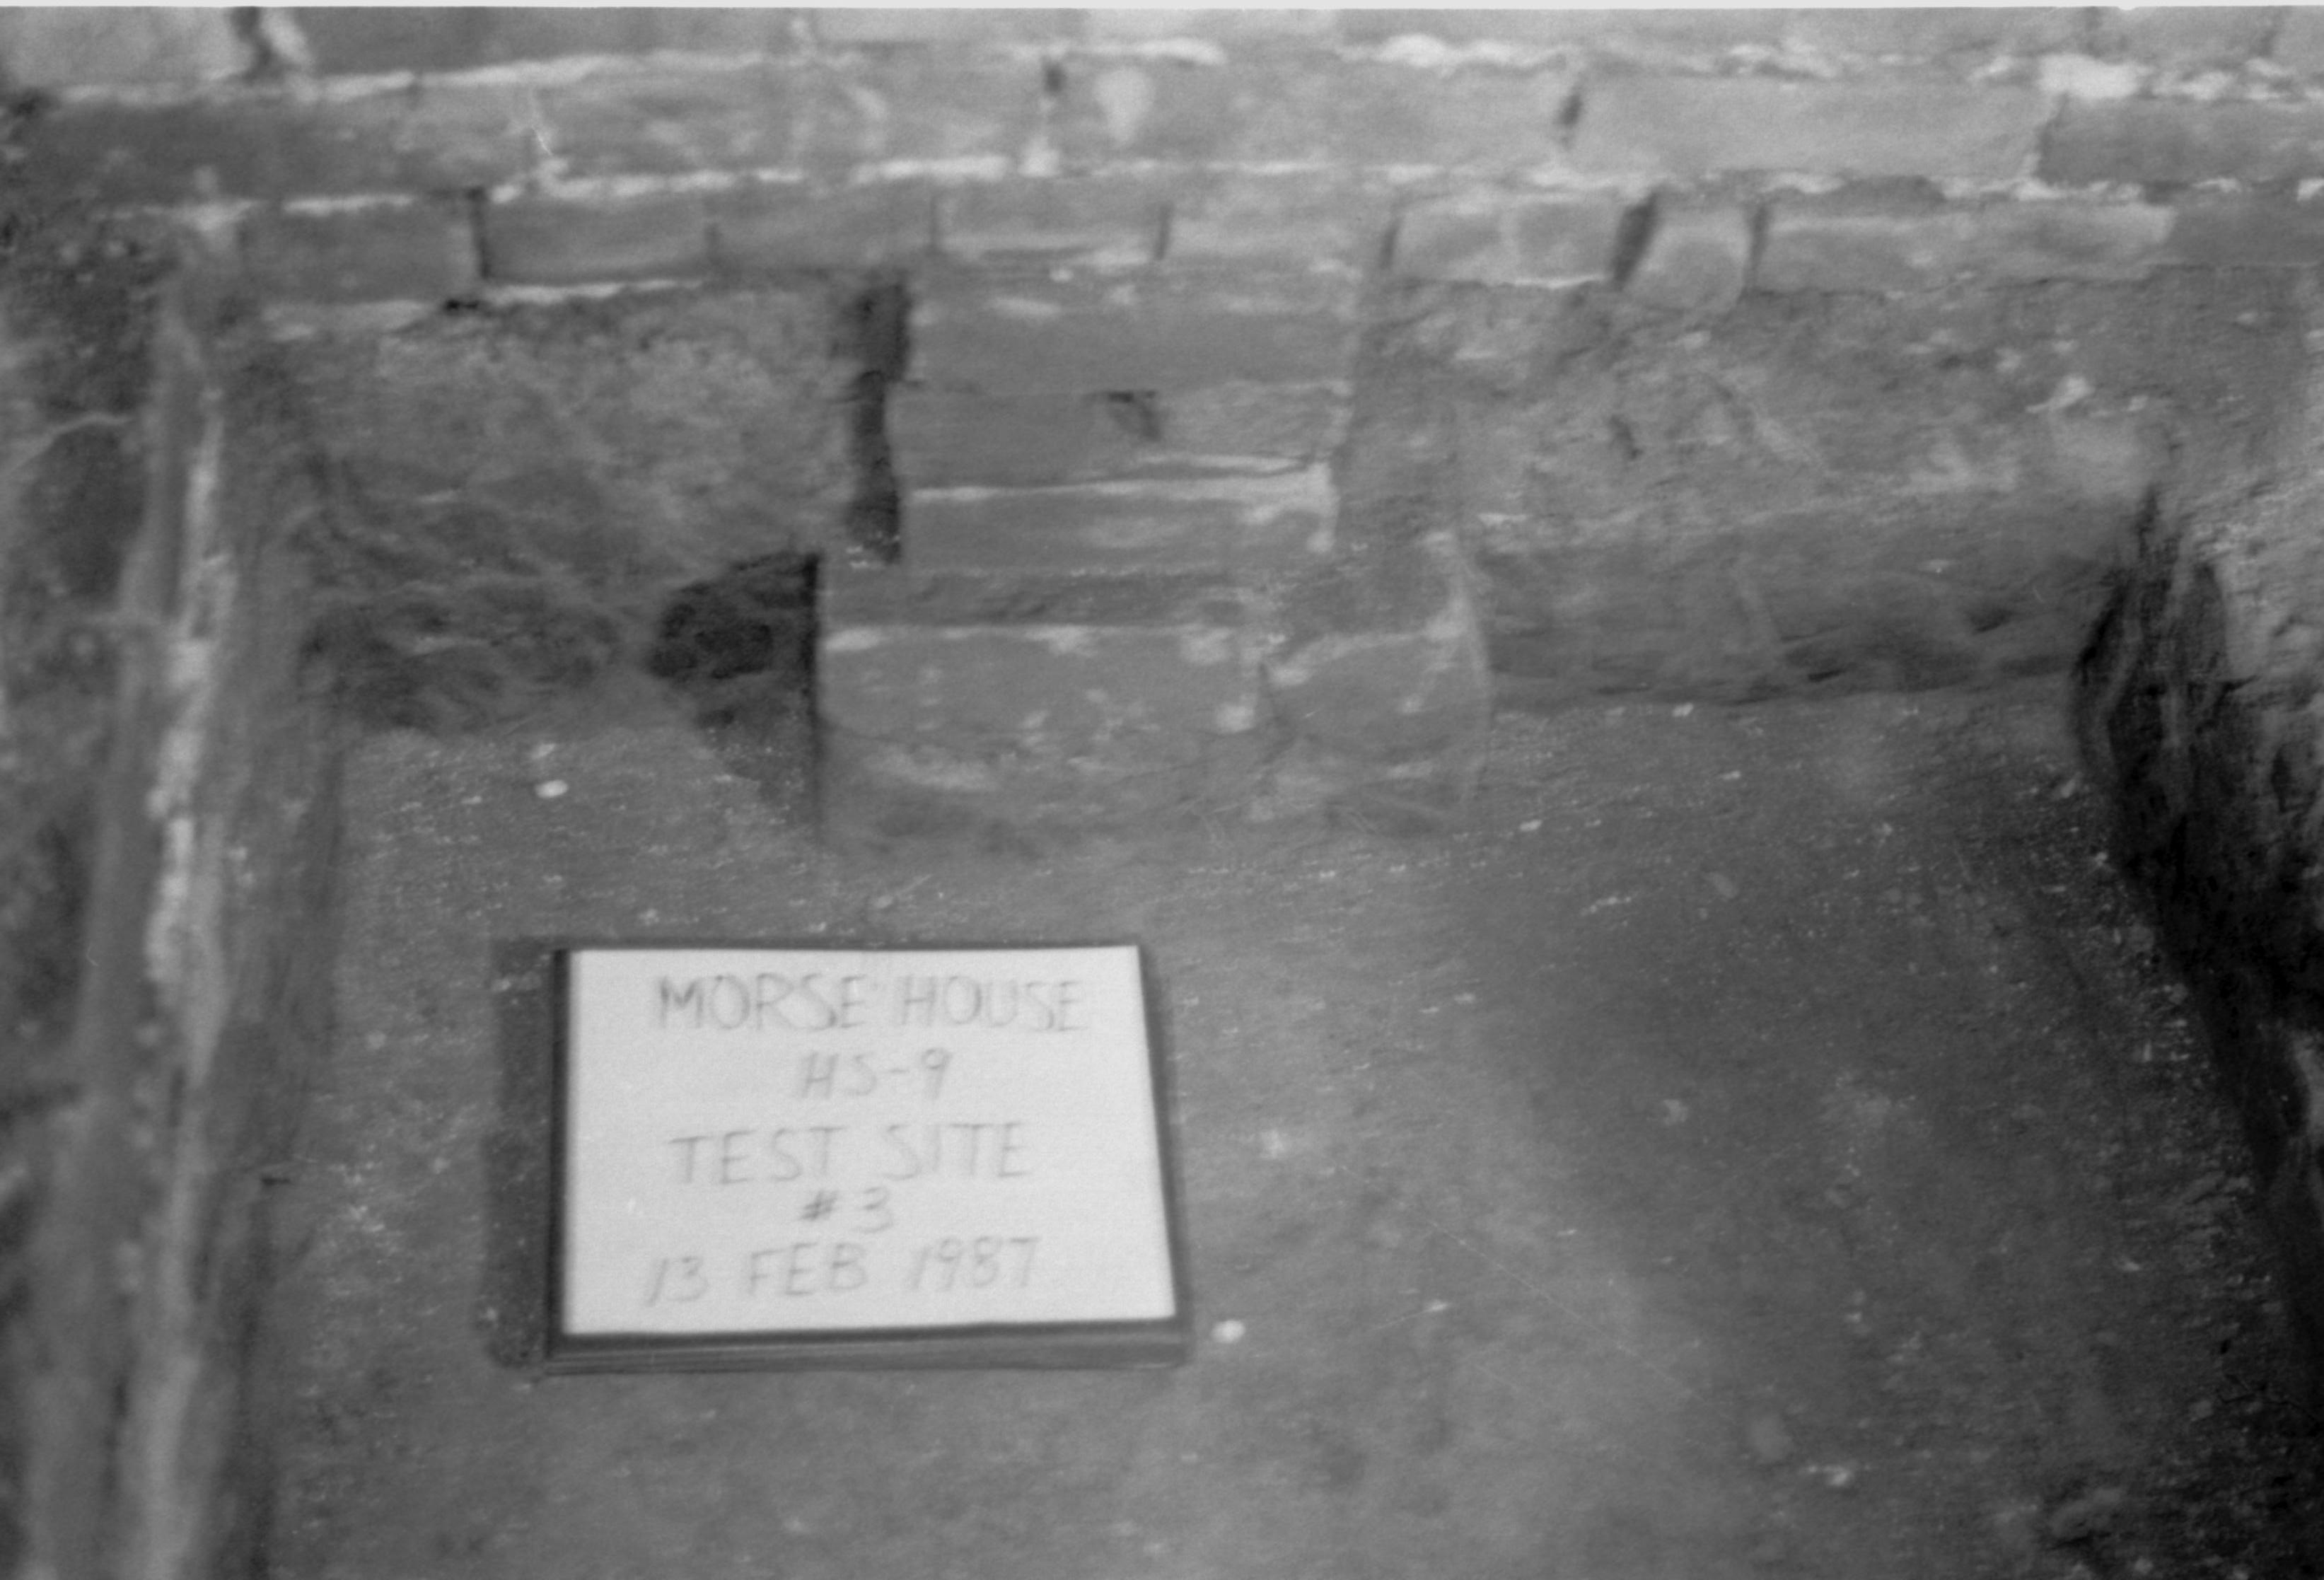 Morse House HS-9 Test Site #3. Brick foundation and basement floor, with test pit and id plaque in foreground.